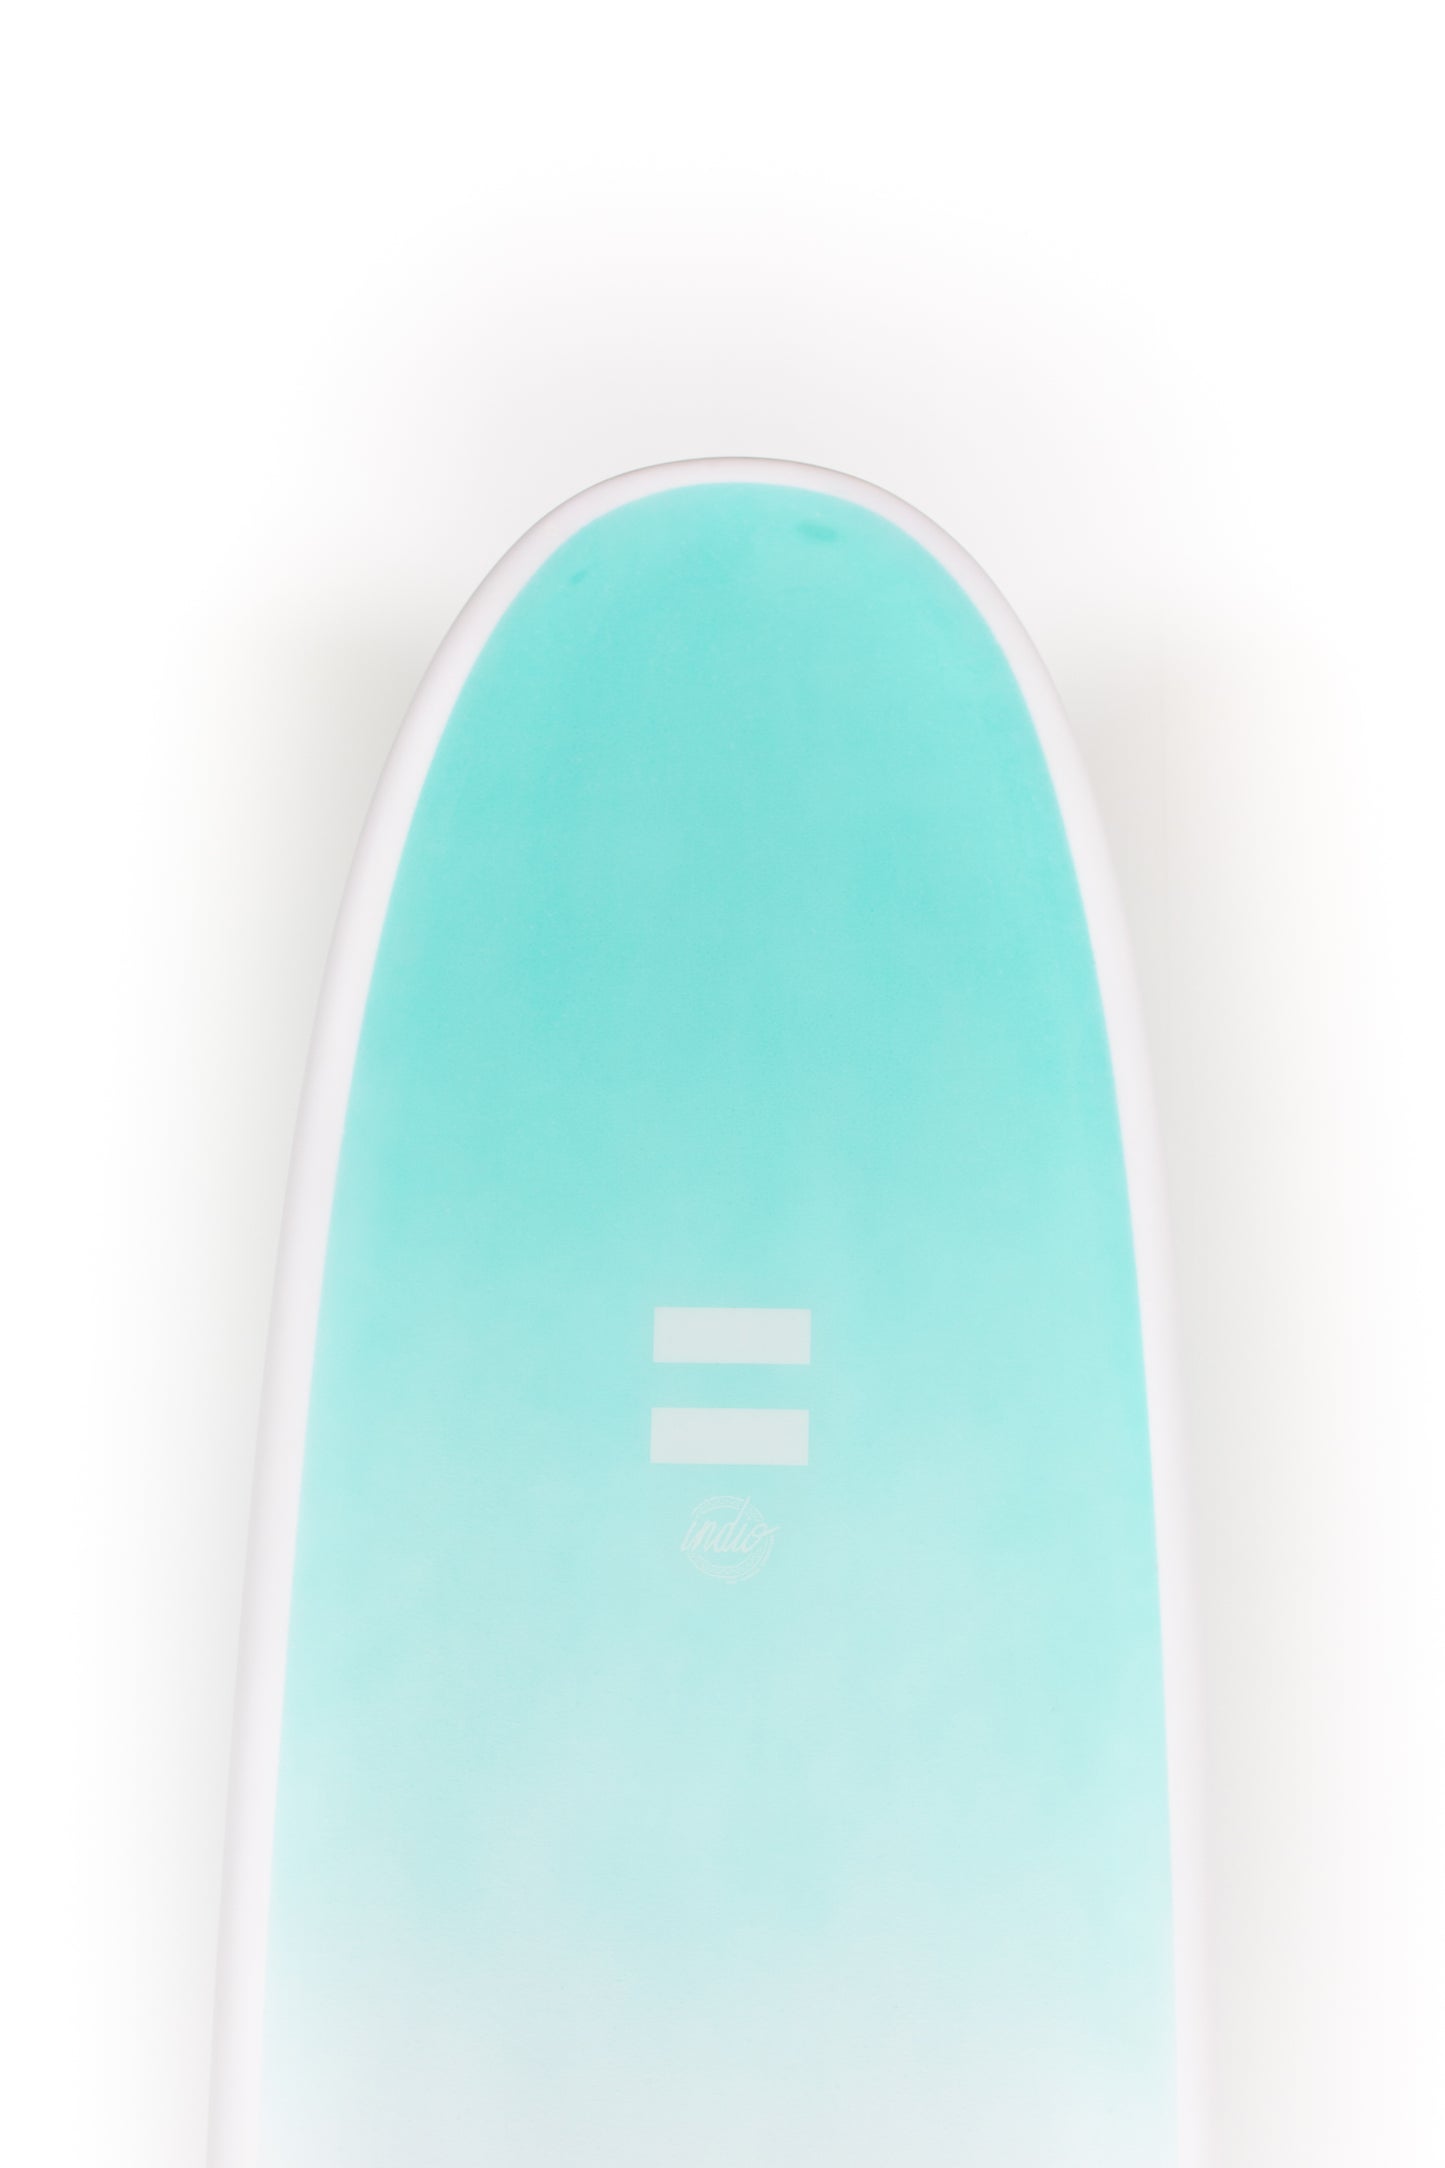 
                  
                    Pukas Surf Shop -  Indio Surfboards - MID LENGTH India 2 - 7'6" x 21 1/2 x 2 7/8 - 53,10l.
                  
                